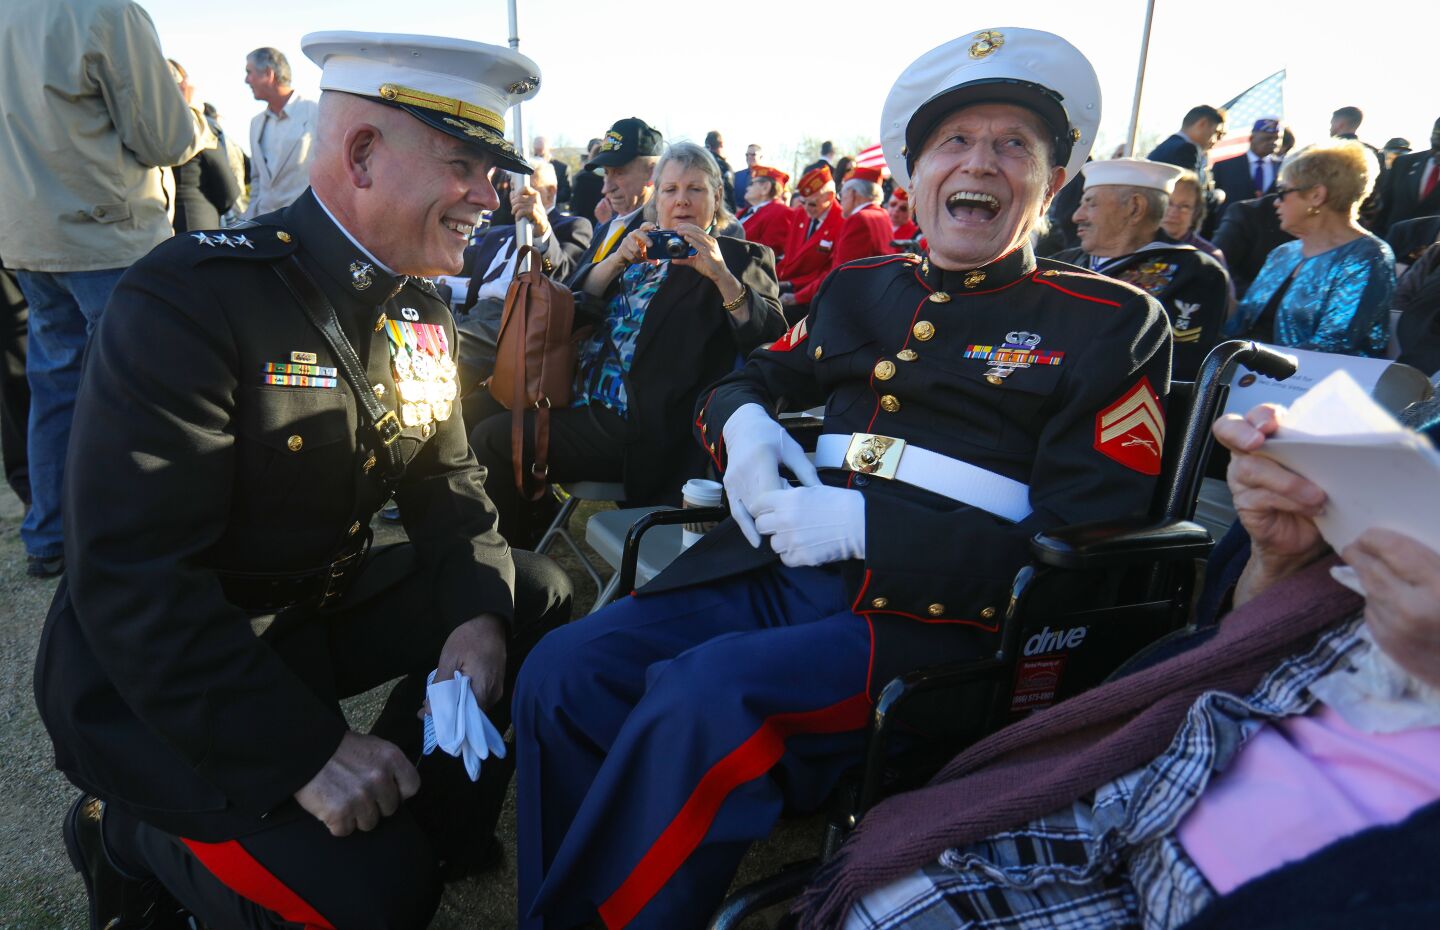 Marine Corps Lt. General Joseph L. Osterman, commanding general of the the I Marine Expeditionary Force, and Samuel Prestigiacomo, of Newport Beach, who was a Marine in the World War II Battle of Iwo Jima, enjoy a laugh before the commemoration ceremony for the 75th anniversary of the famous battle began at Camp Pendleton, February 15. This is the last time the Iwo Jima Commemorative Committee is planning to hold a formal West Coast gathering of veterans of the battle.